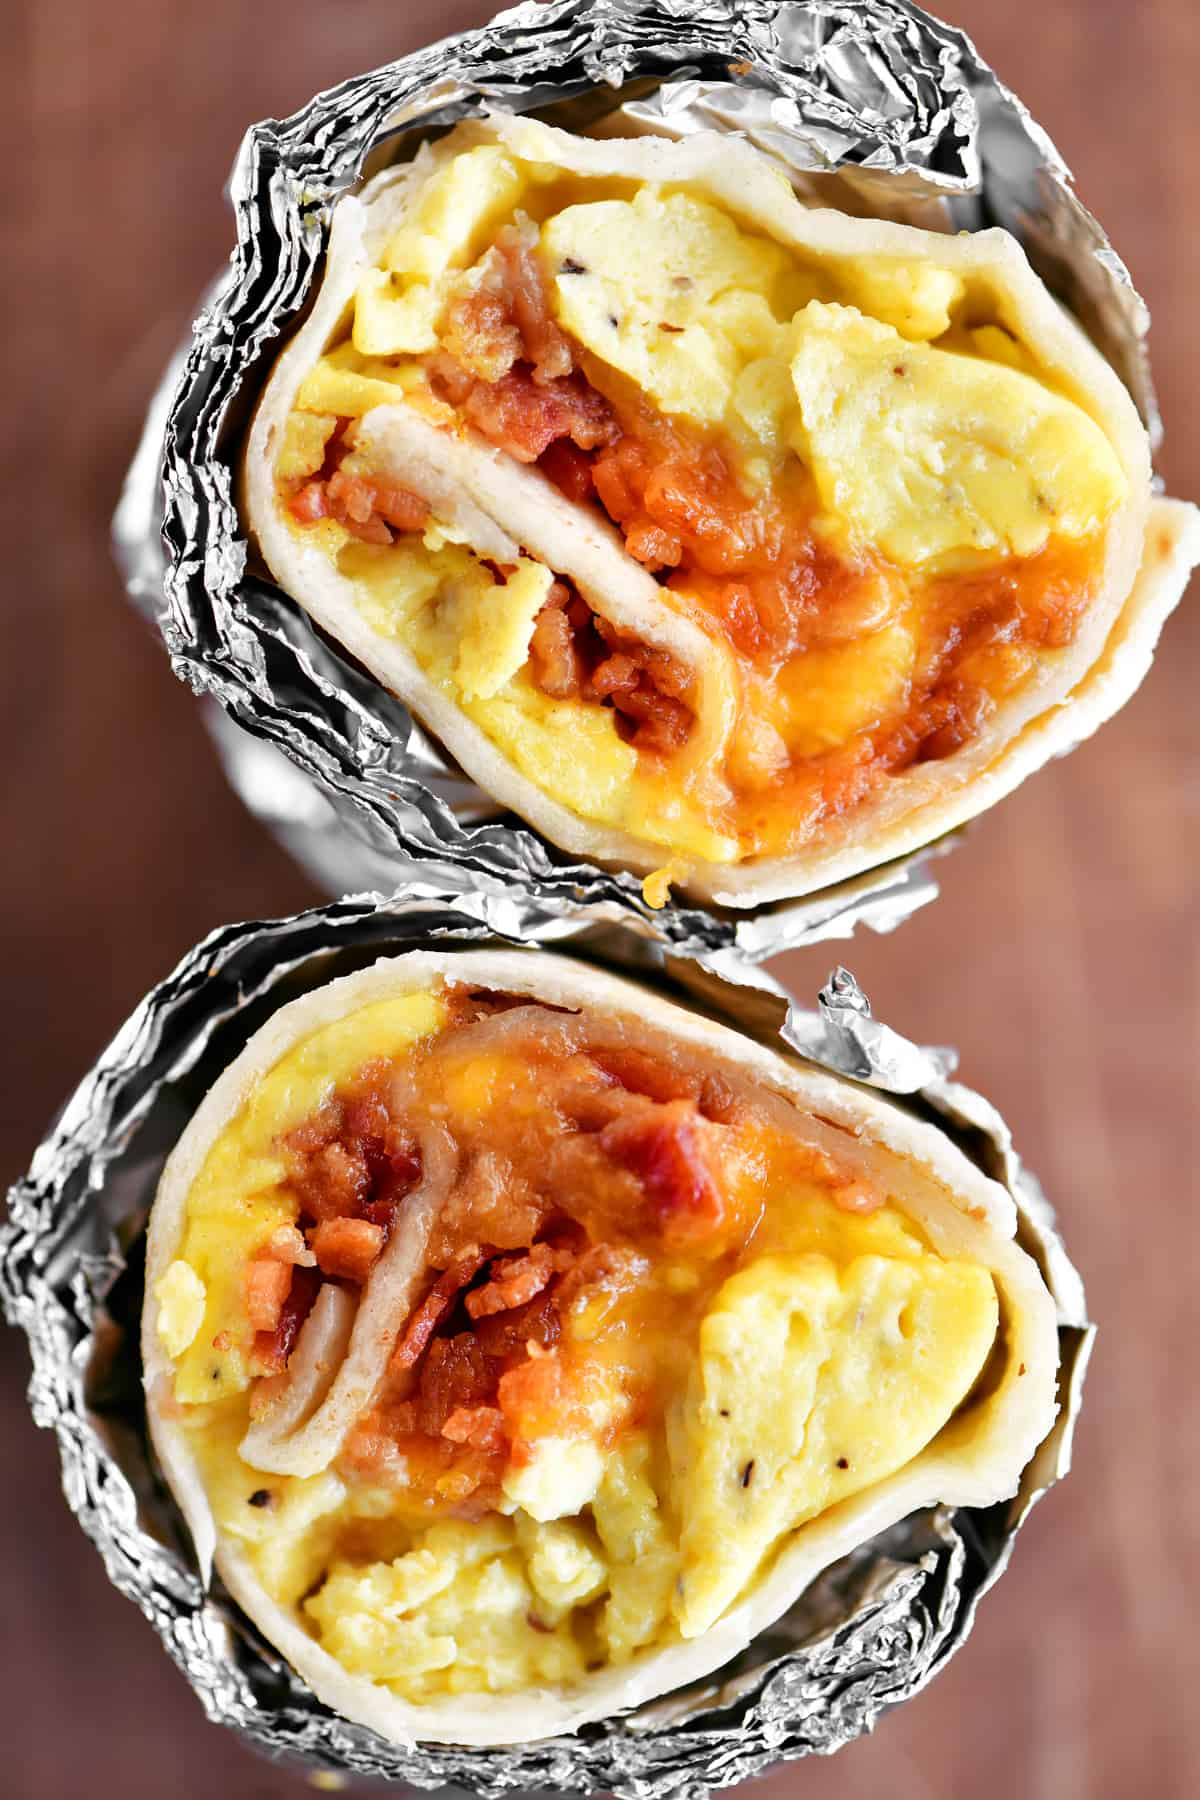 two halves of a breakfast burrito filled with bacon eggs and cheese